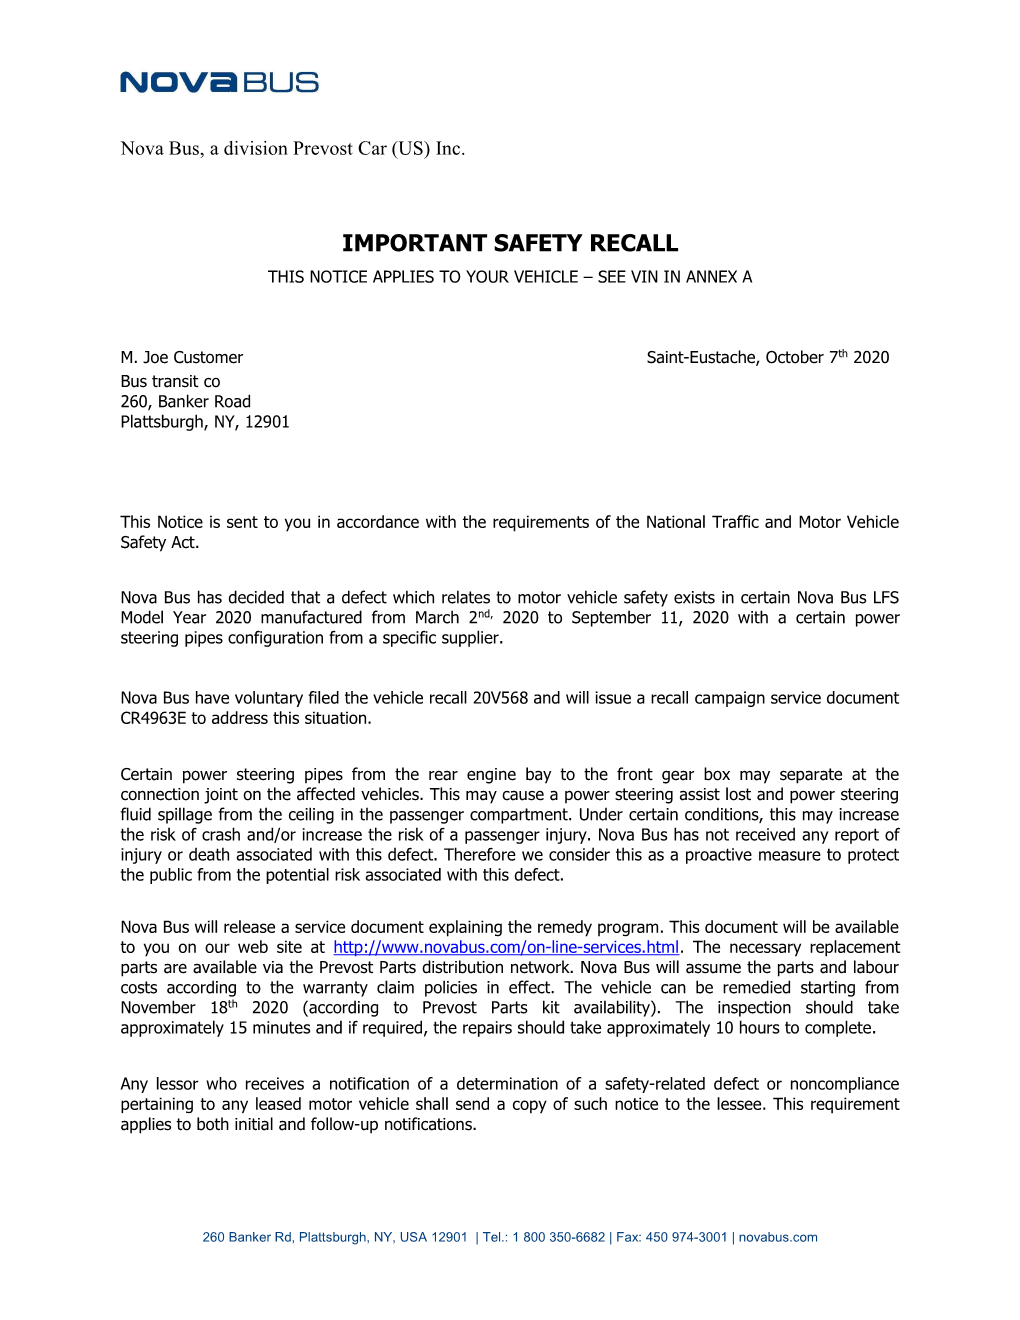 Important Safety Recall This Notice Applies to Your Vehicle – See Vin in Annex A